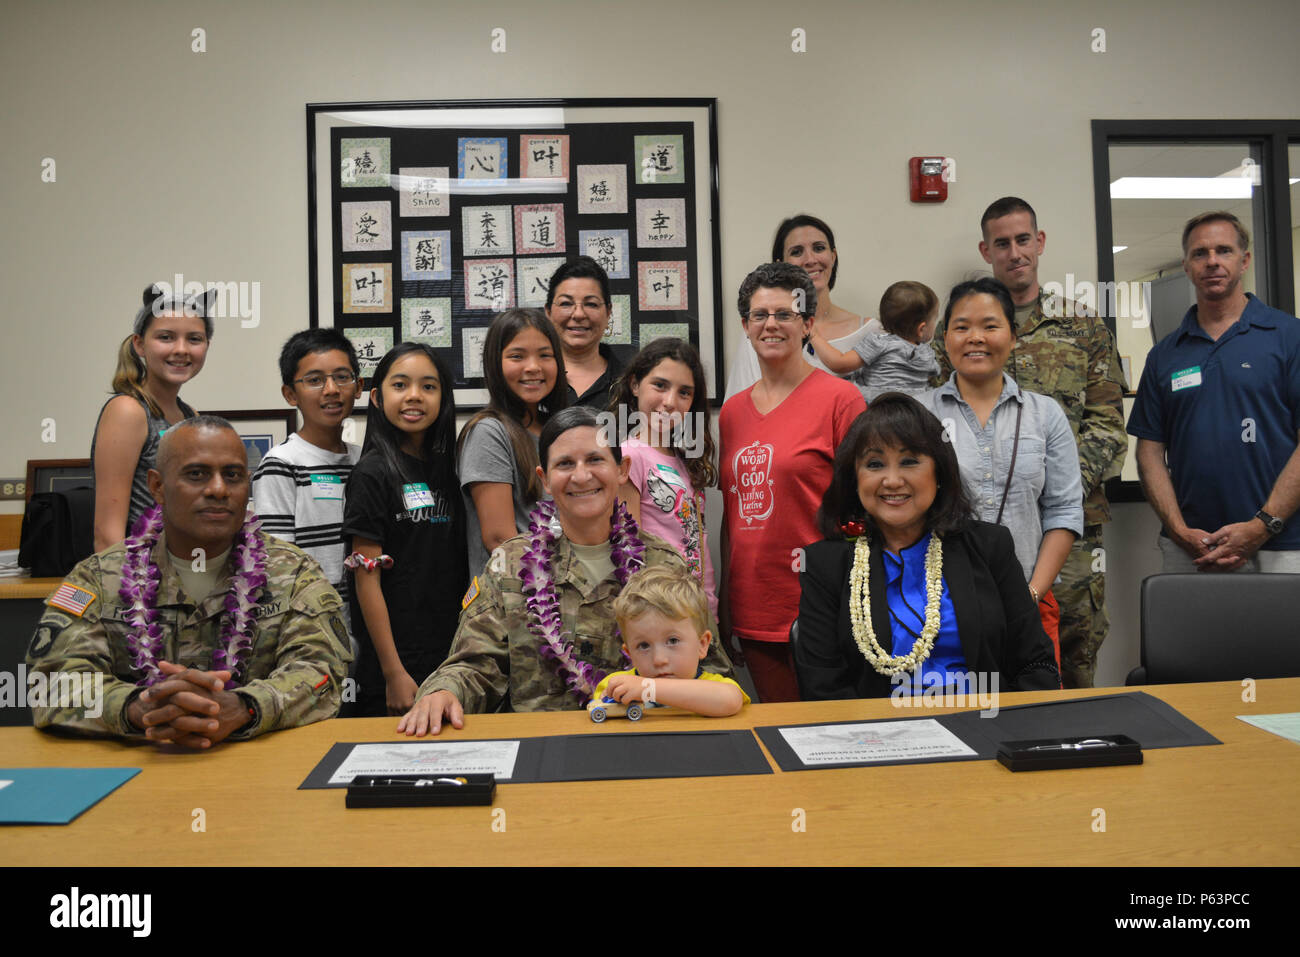 MILILANI, Hawaii – Lt. Col. Heather Levy and Command Sgt. Maj. Giovanni Fuentes, the command team for 65th Brigade Engineer Battalion, 2nd Brigade Combat Team, 25th Infantry Division, takes a photo with Mililani’s Middle School Principal, Elynne E. Chung, military students and their families after formally signing a letter of agreement with the school Apr. 9, 2016, at Mililani Middle School in Mililani, Hawaii. Soldiers from the 65th BEB were invited to the annual science, technology, engineering, and math education (STEM) night and discuss how the subject are utilized in today’s military. (U. Stock Photo